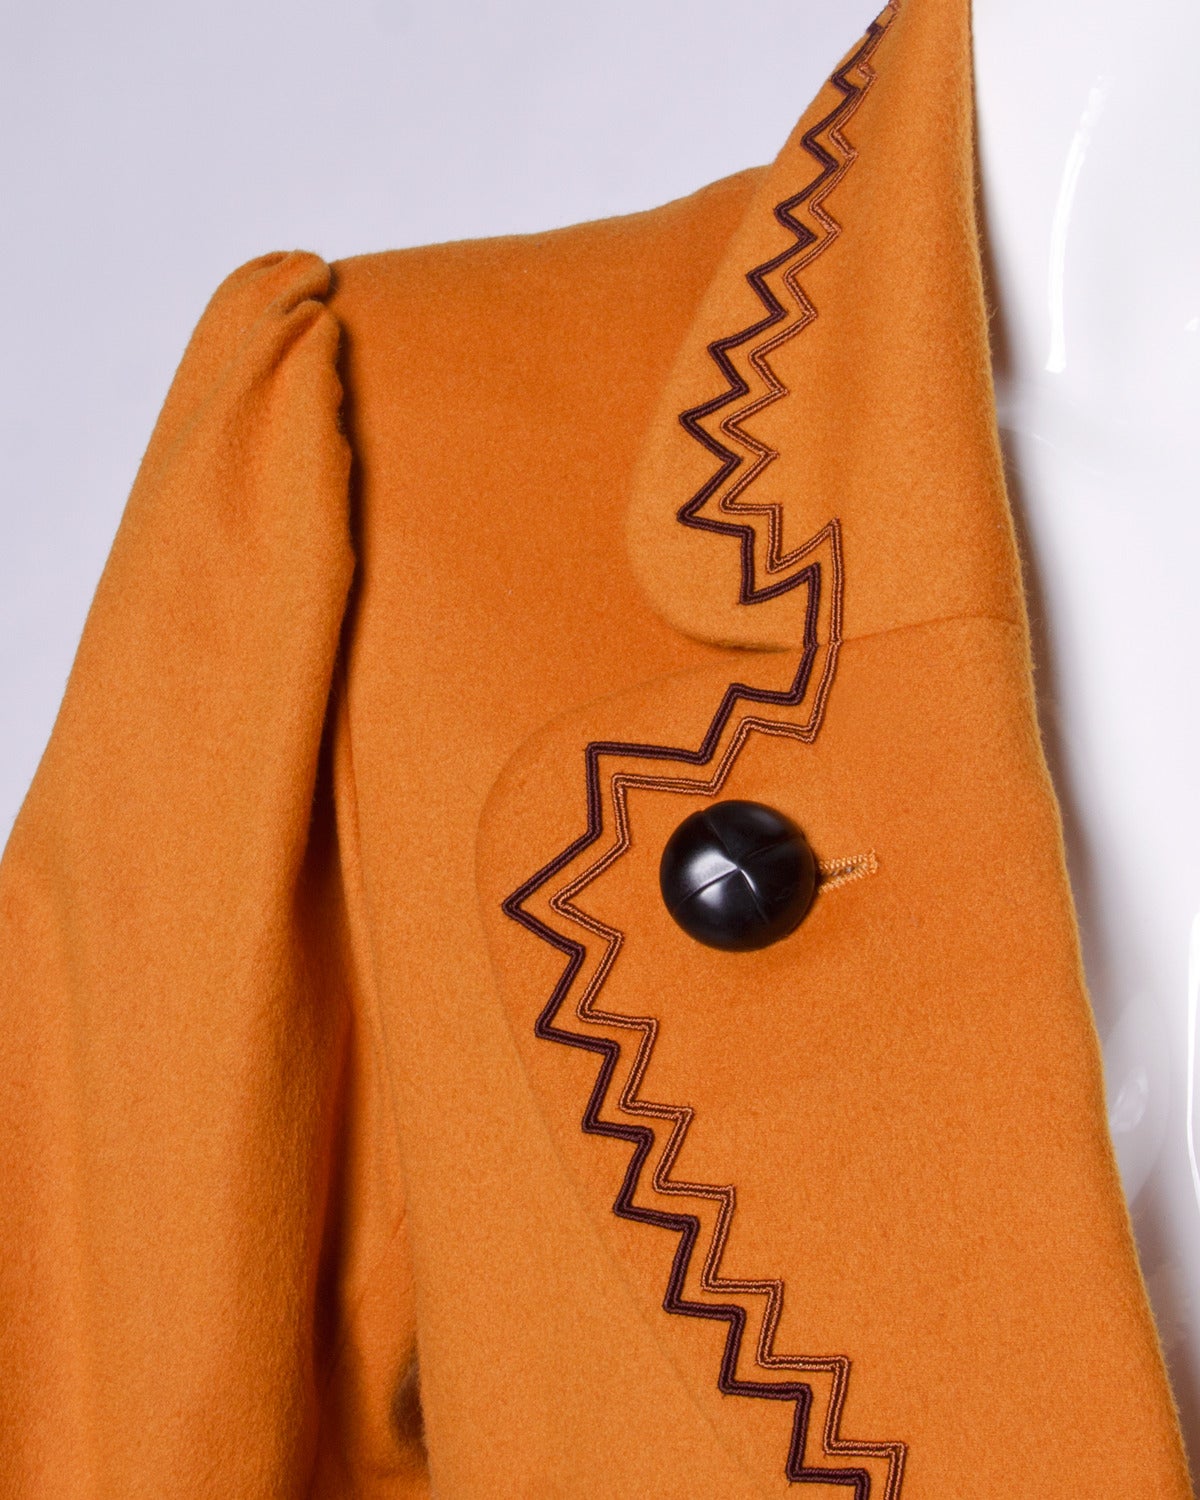 Gorgeous YSL vintage blazer jacket in warm rust wool. Zigzag trim, rounded lapels and patch pockets. So well tailored!

Details:

Fully Lined
Front Pockets
Shoulder Pads Sewn Into Lining
Marked Size: 36
Color: Rust
Fabric: Feels like